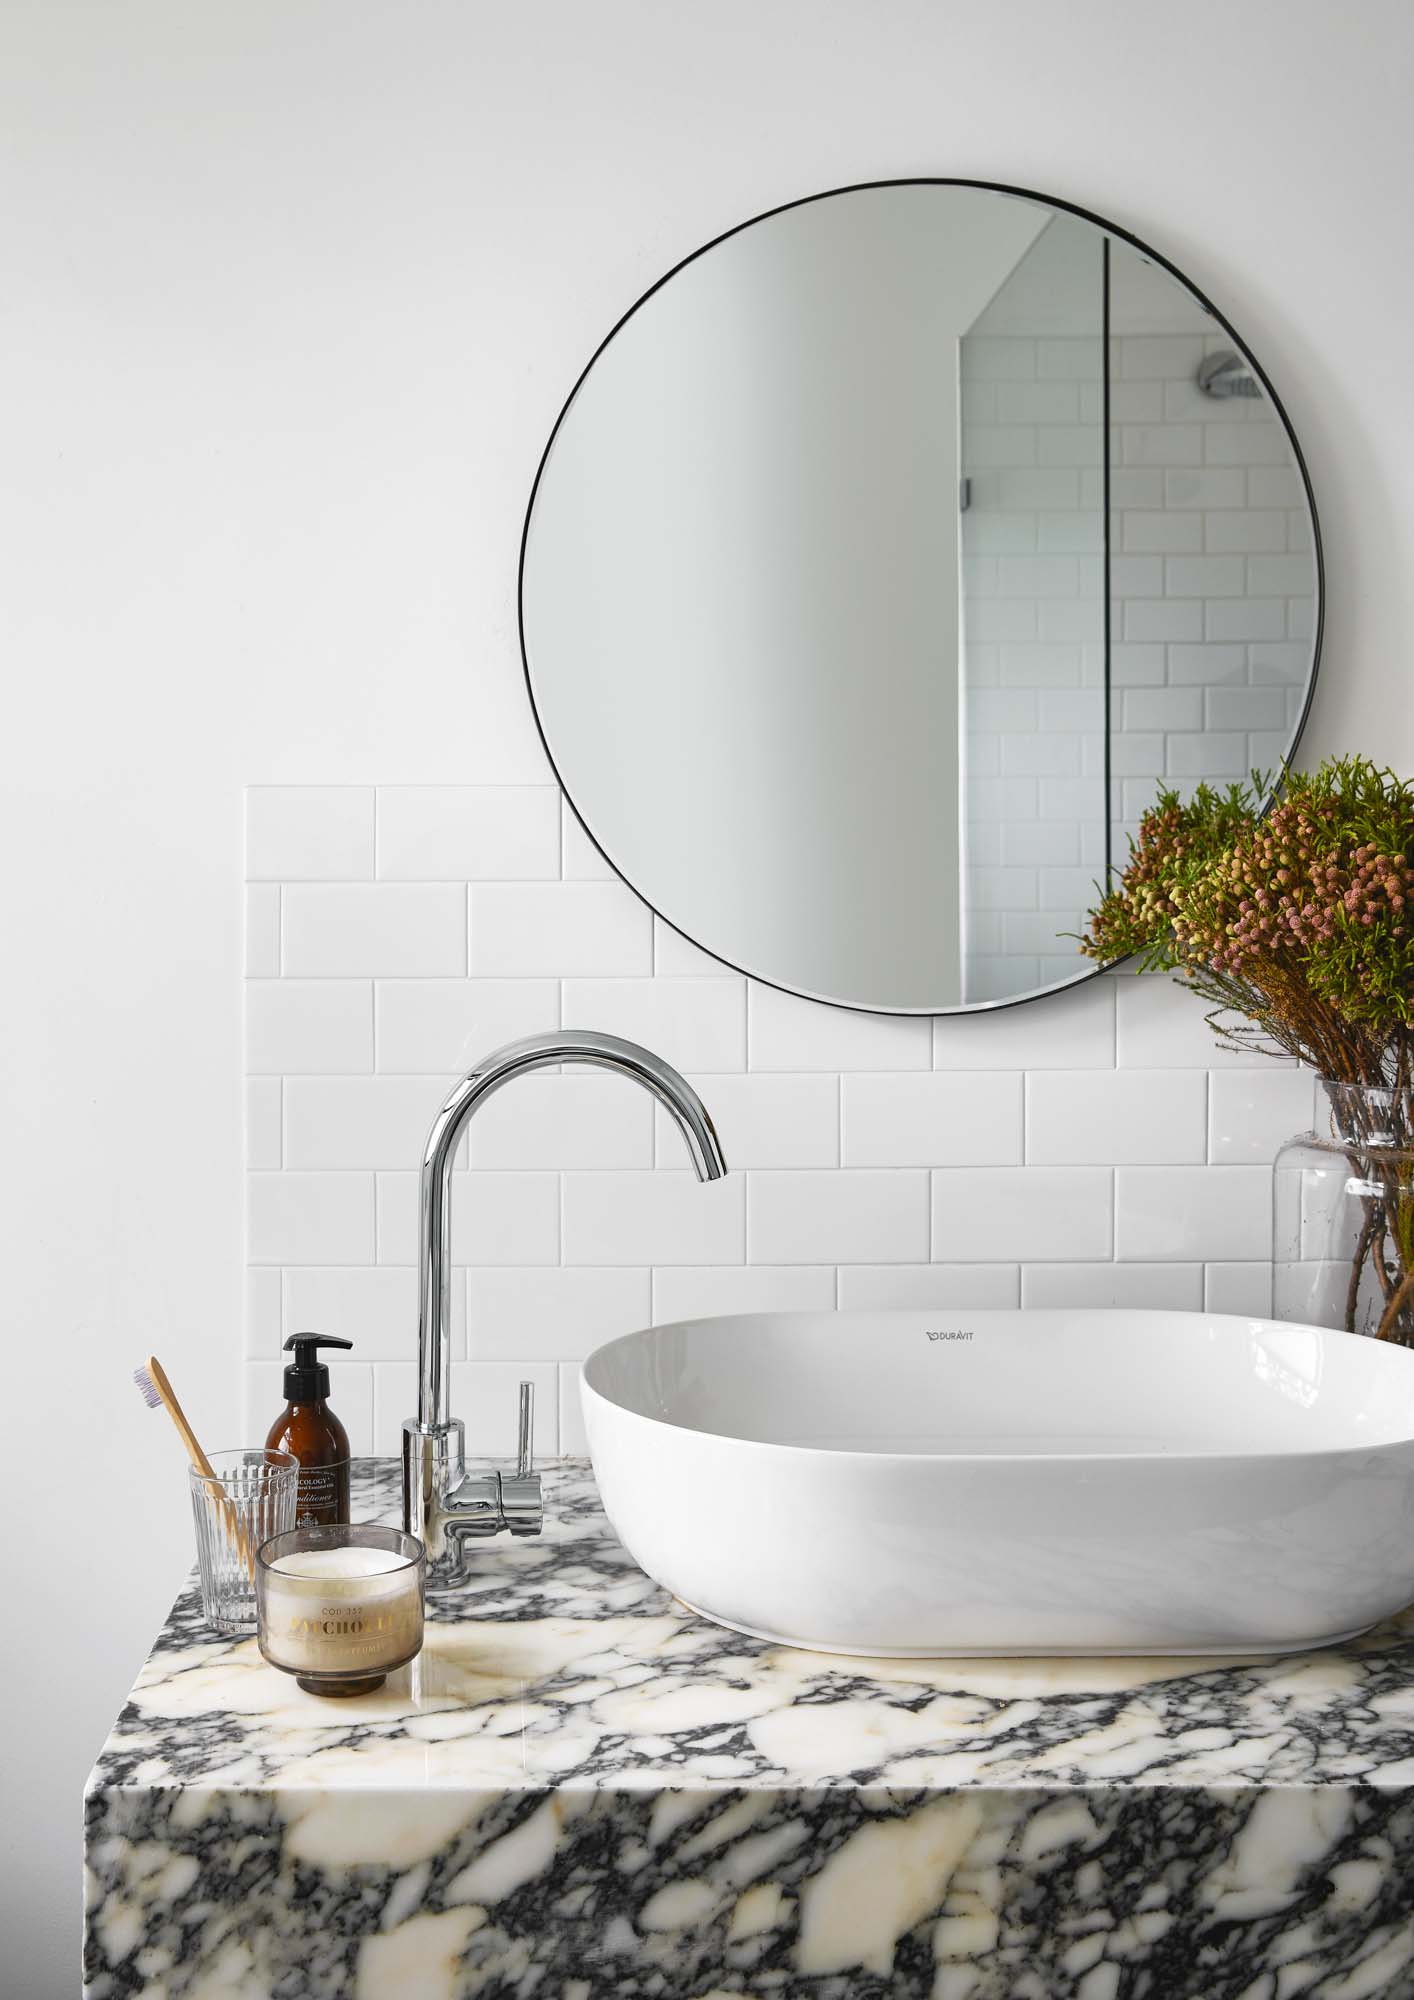 A white and black veined bathroom bench with a white sink and a round mirror on the wall